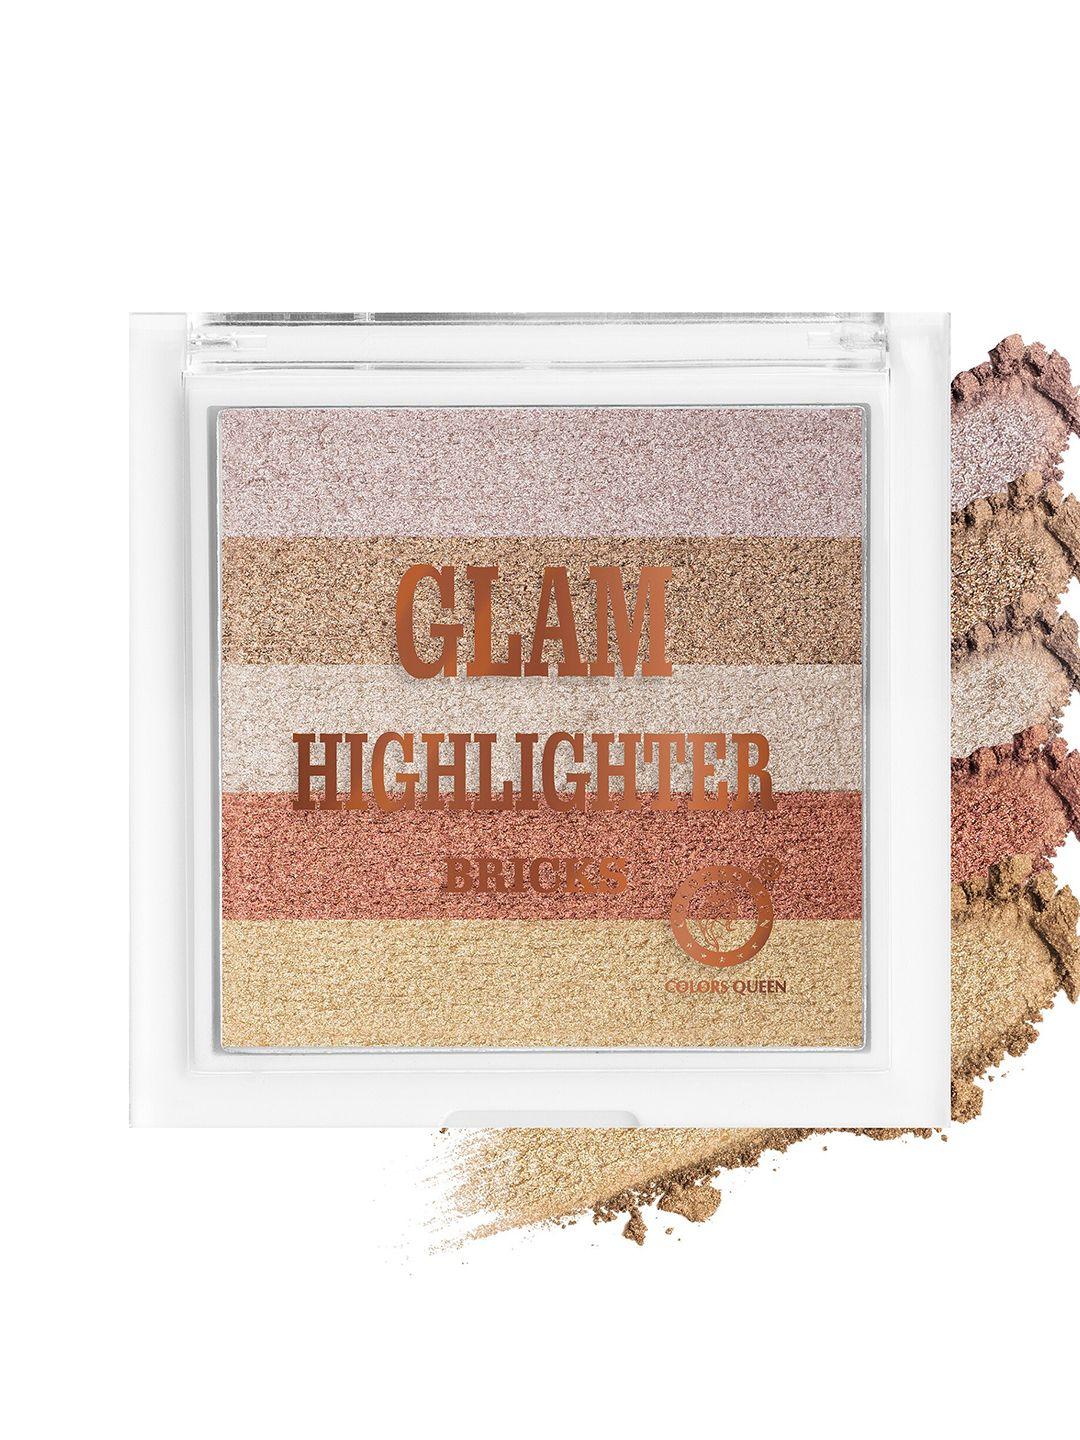 colors queen shimmer glam brick highlighter 12g - shade 03